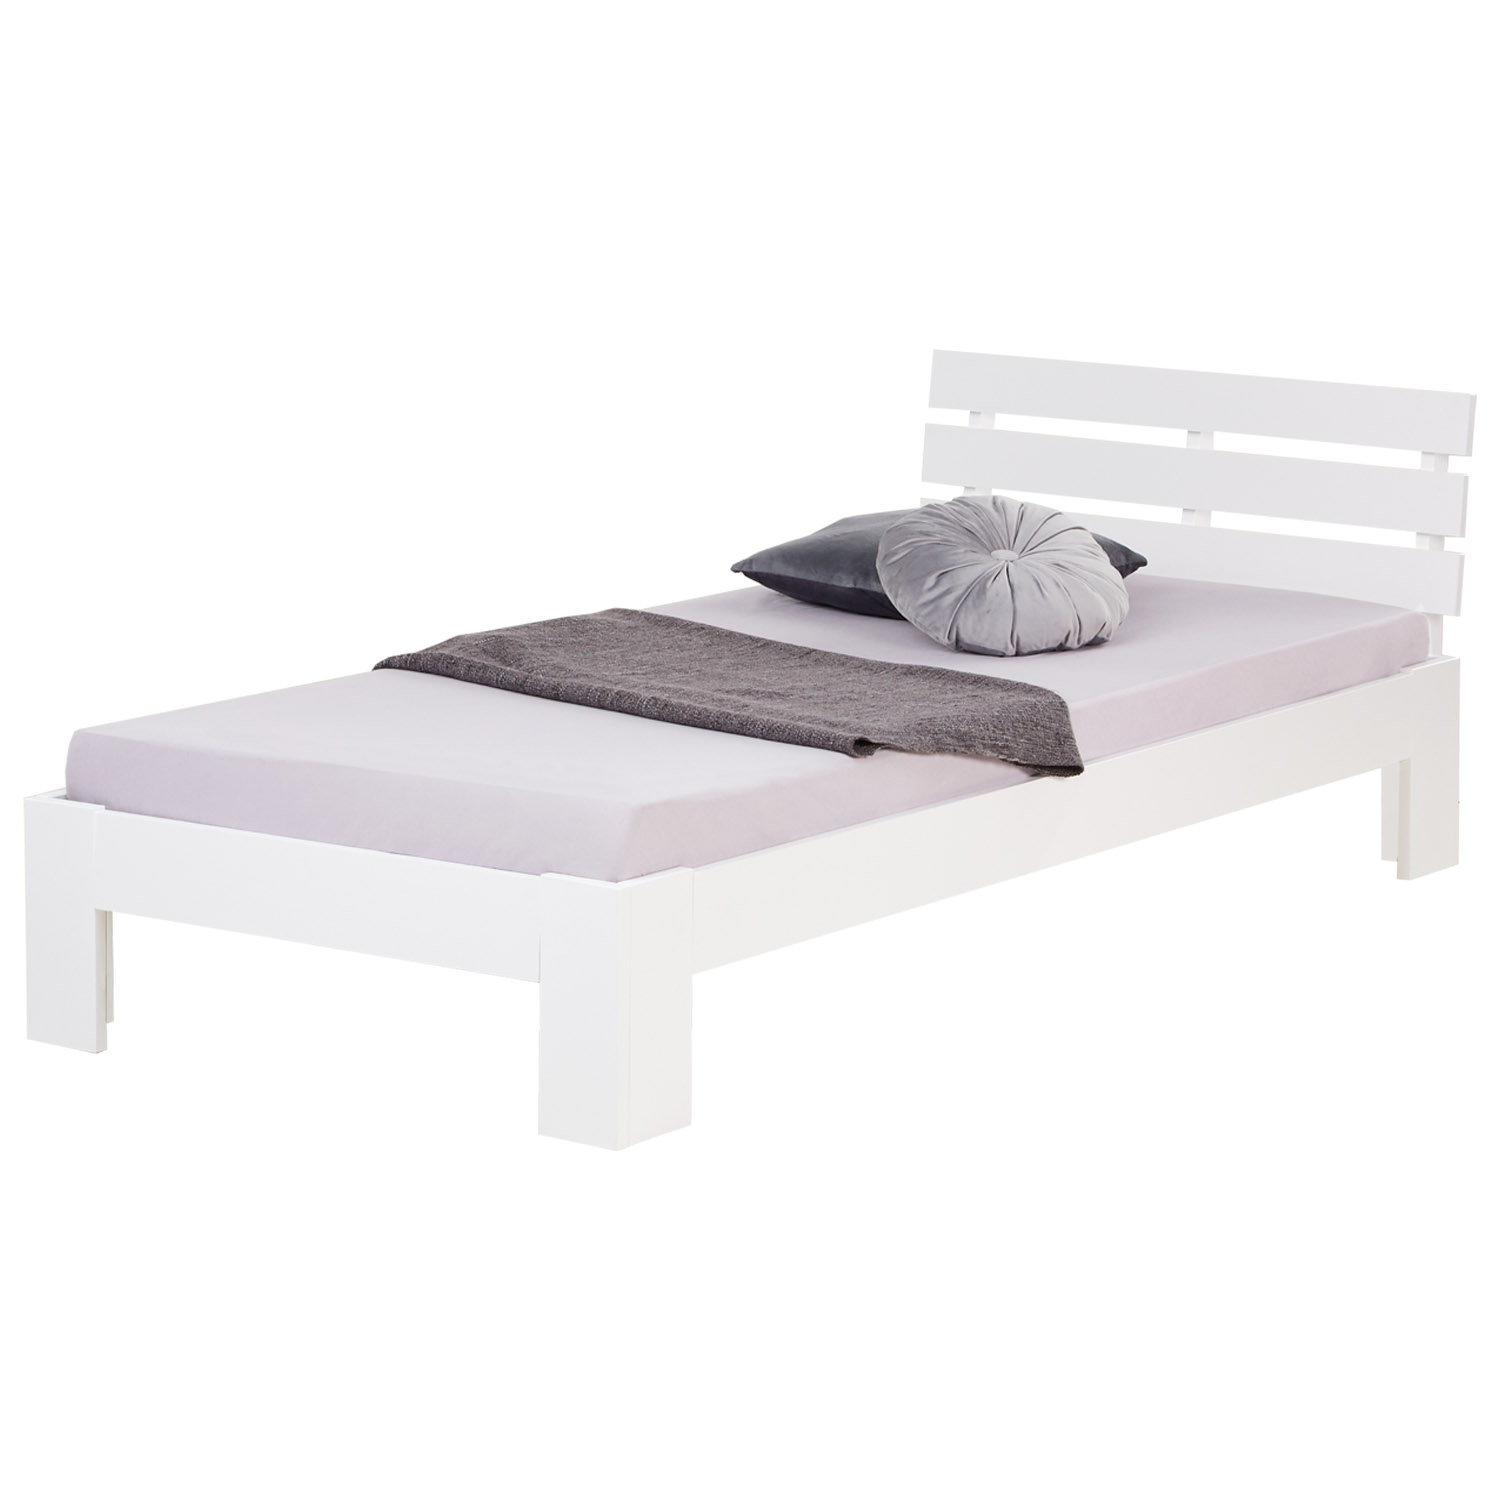 Single Bed Wooden Bed 90x200 with Slatted Frame White Pine Bed Bedstead Solid Wood